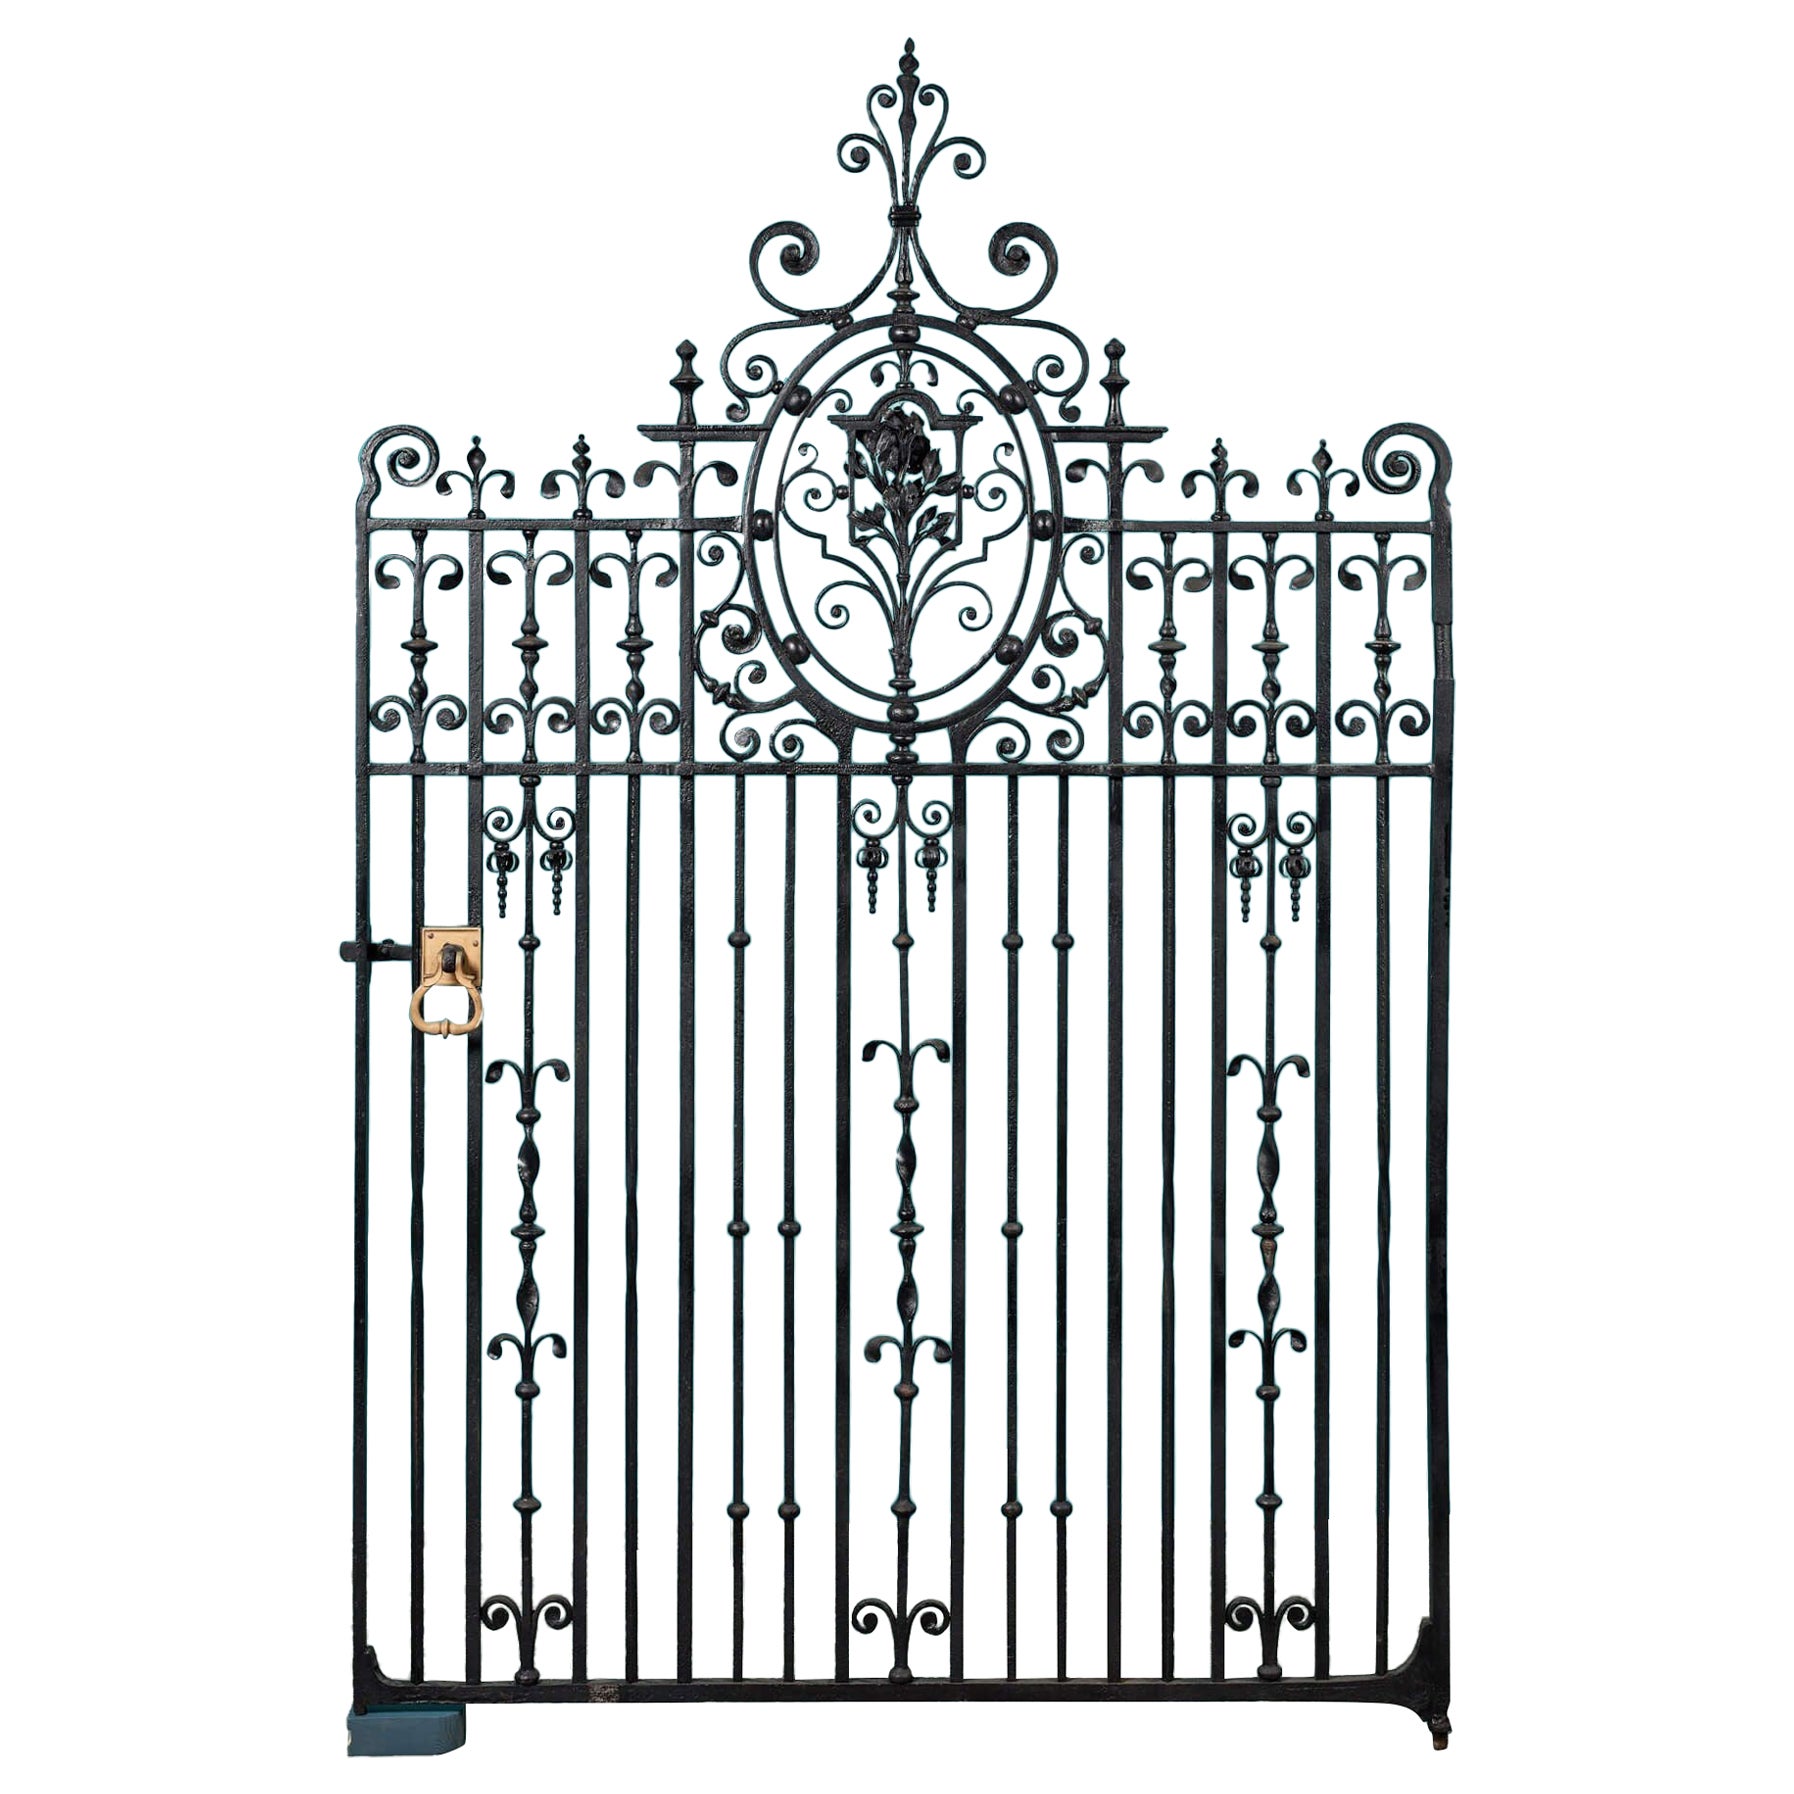 Grand Antique Georgian Wrought Iron Gate For Sale